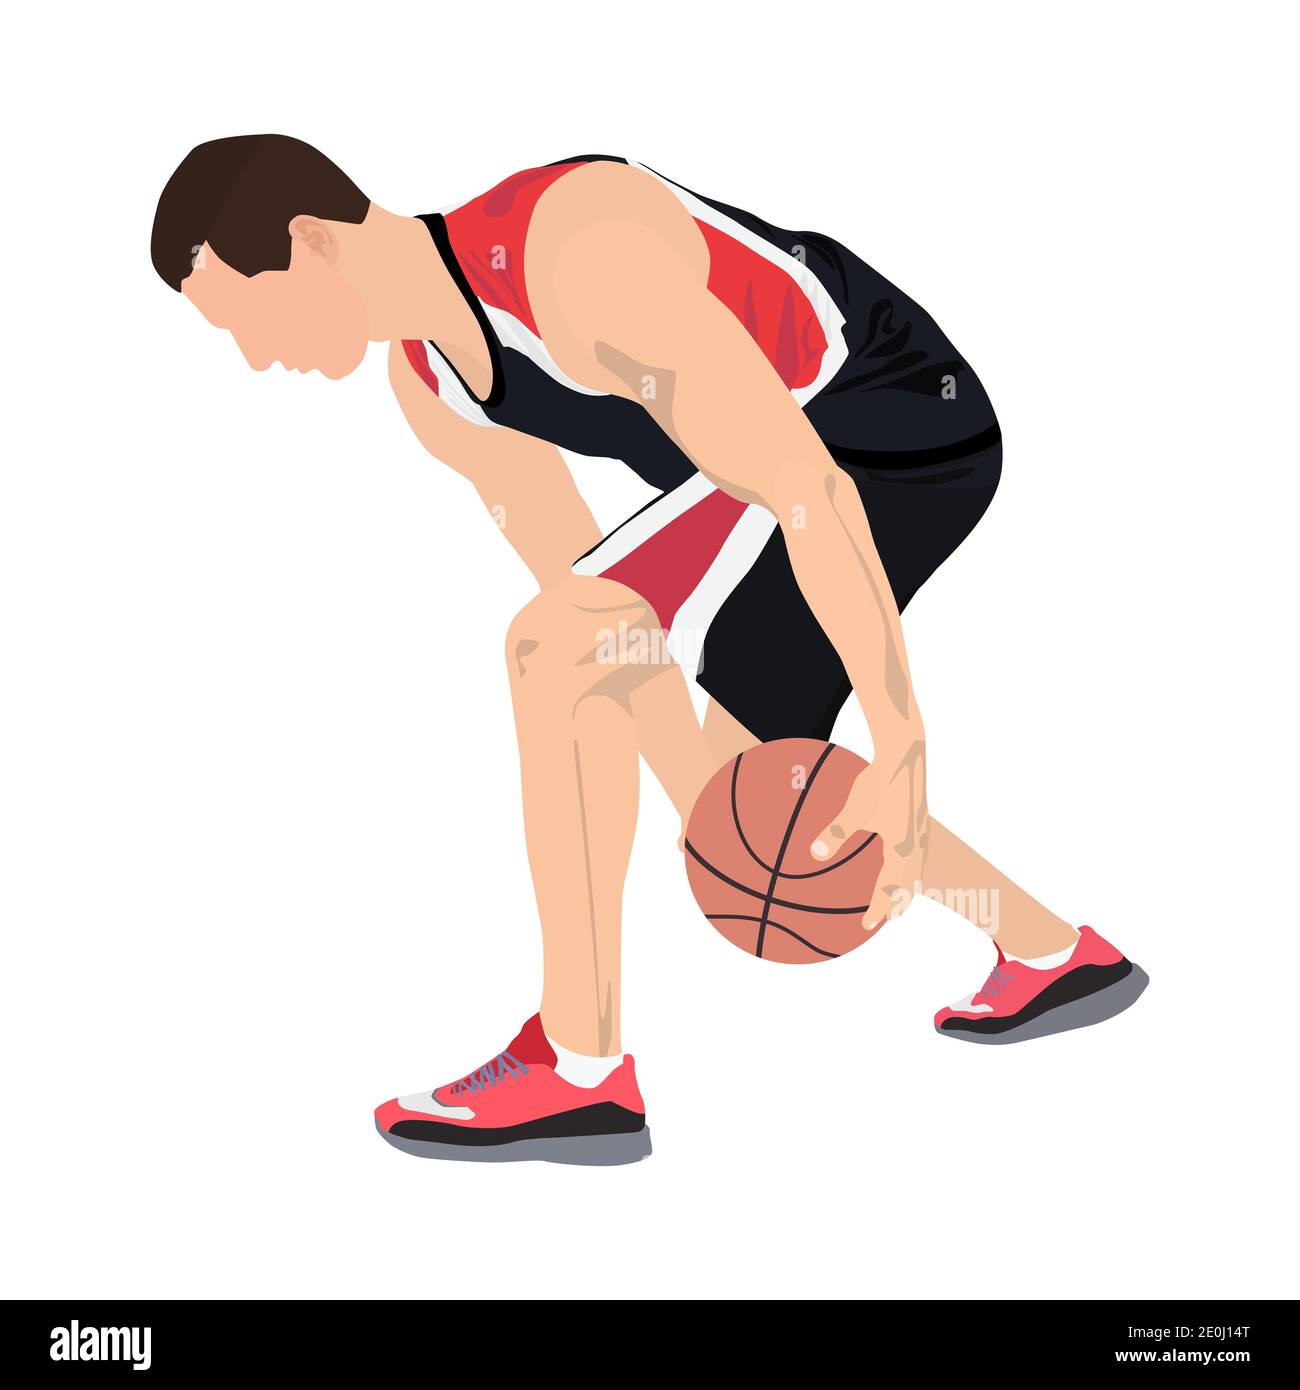 Crossover dribble basketball Stock Vector Images - Alamy